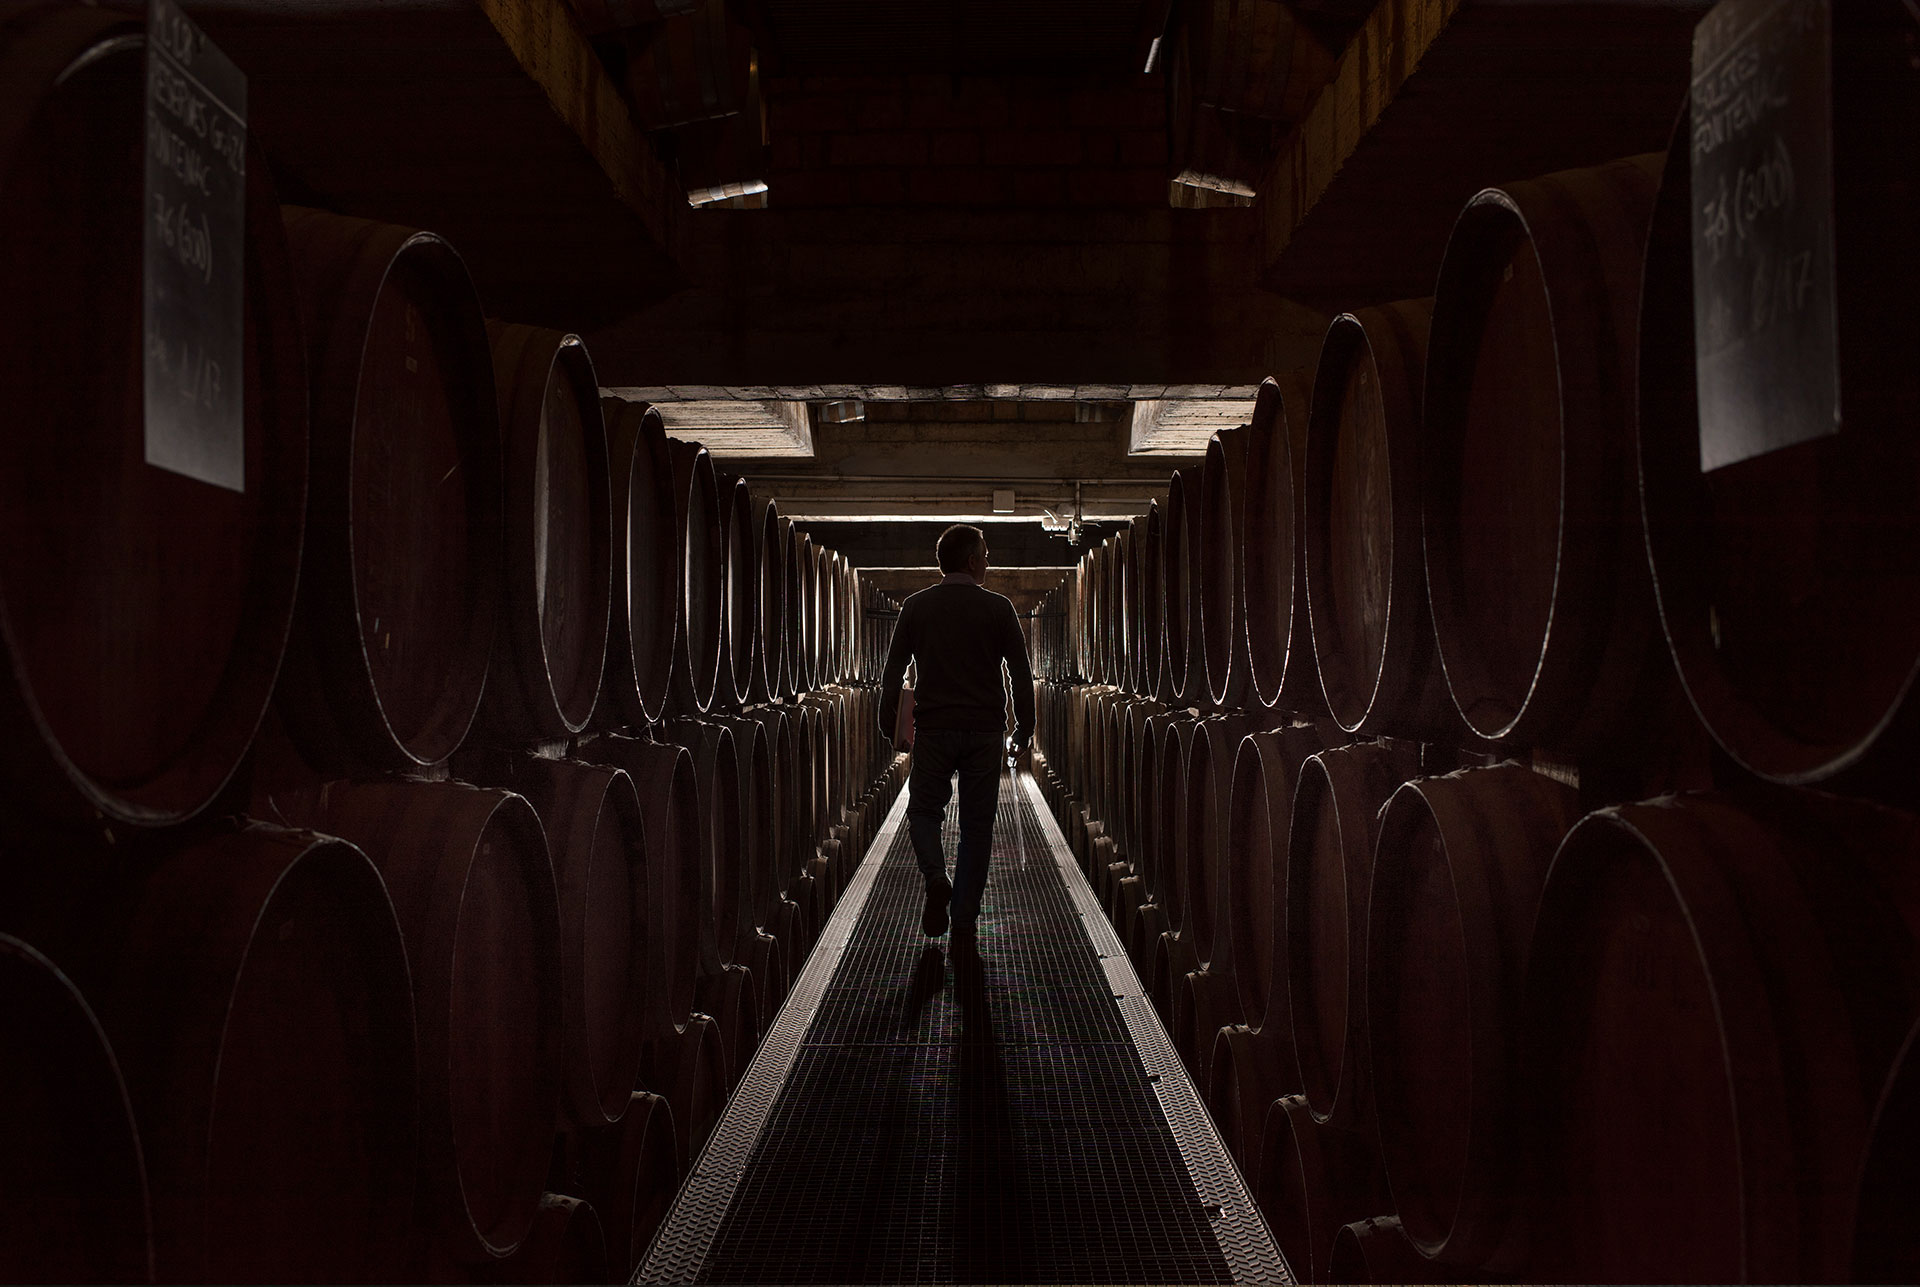 Torres Brandy, almost a century of experience in the art of making brandy.